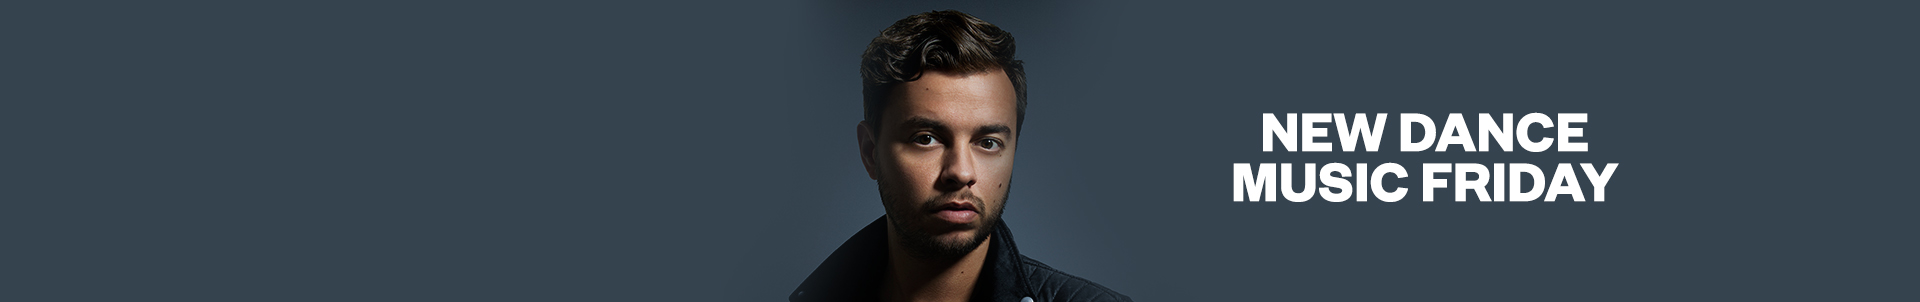 Exclusive interview: New Dance Music Friday with Quintino